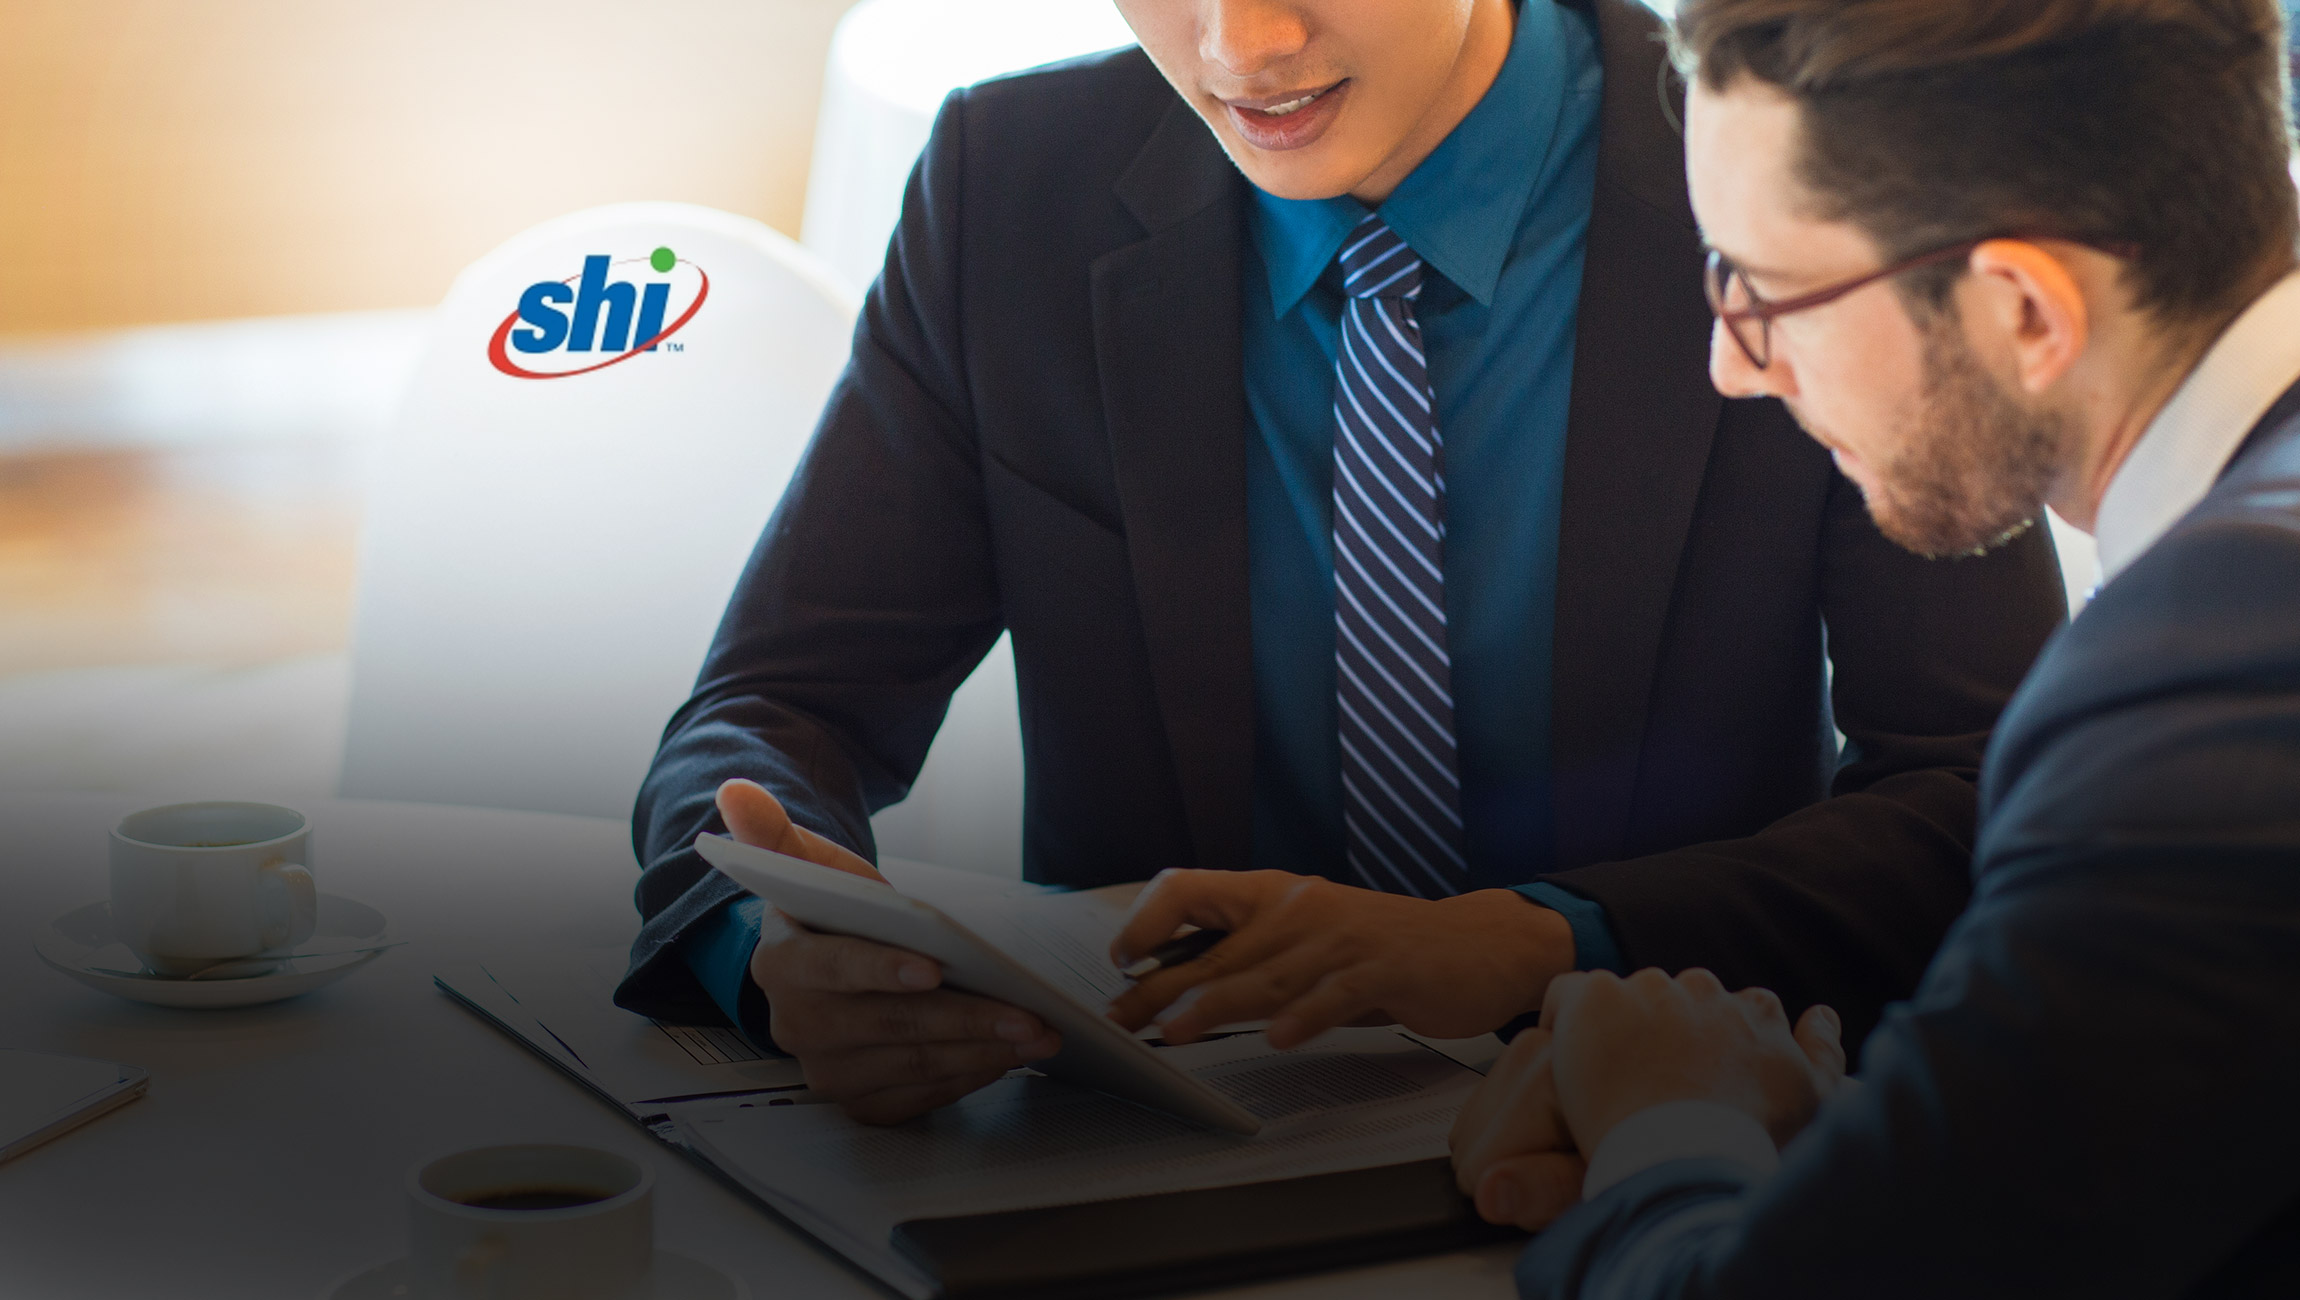 SHI International Achieves VMware Master Services Competency in Cloud Management and Automation